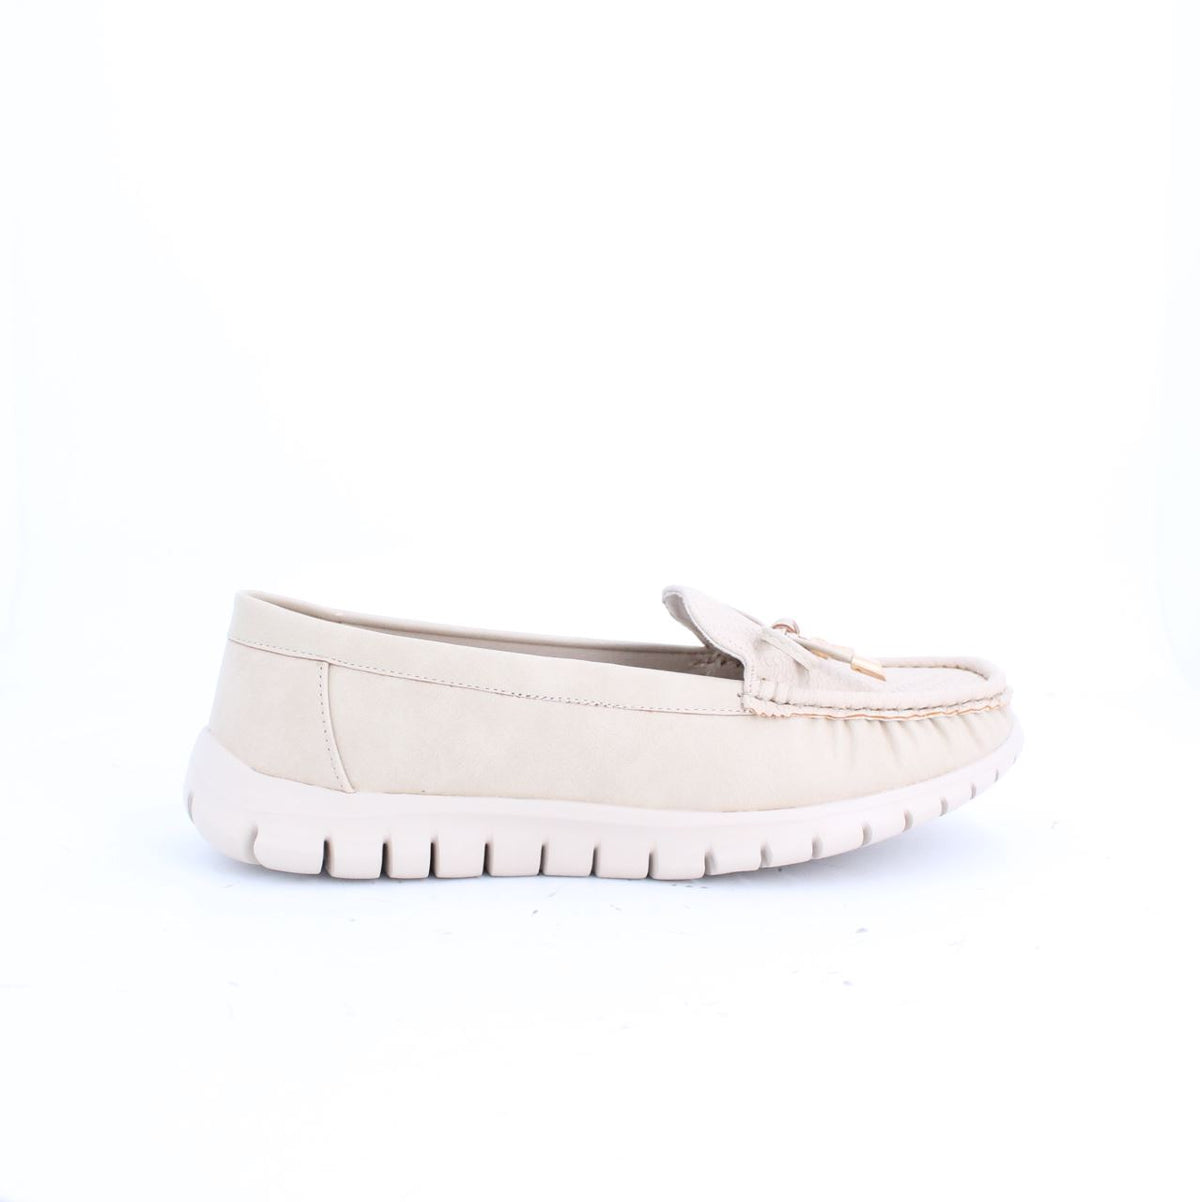 ARELLA-LOAFERS & MOCCASINS-FLATS-NUDE/TOBACCO